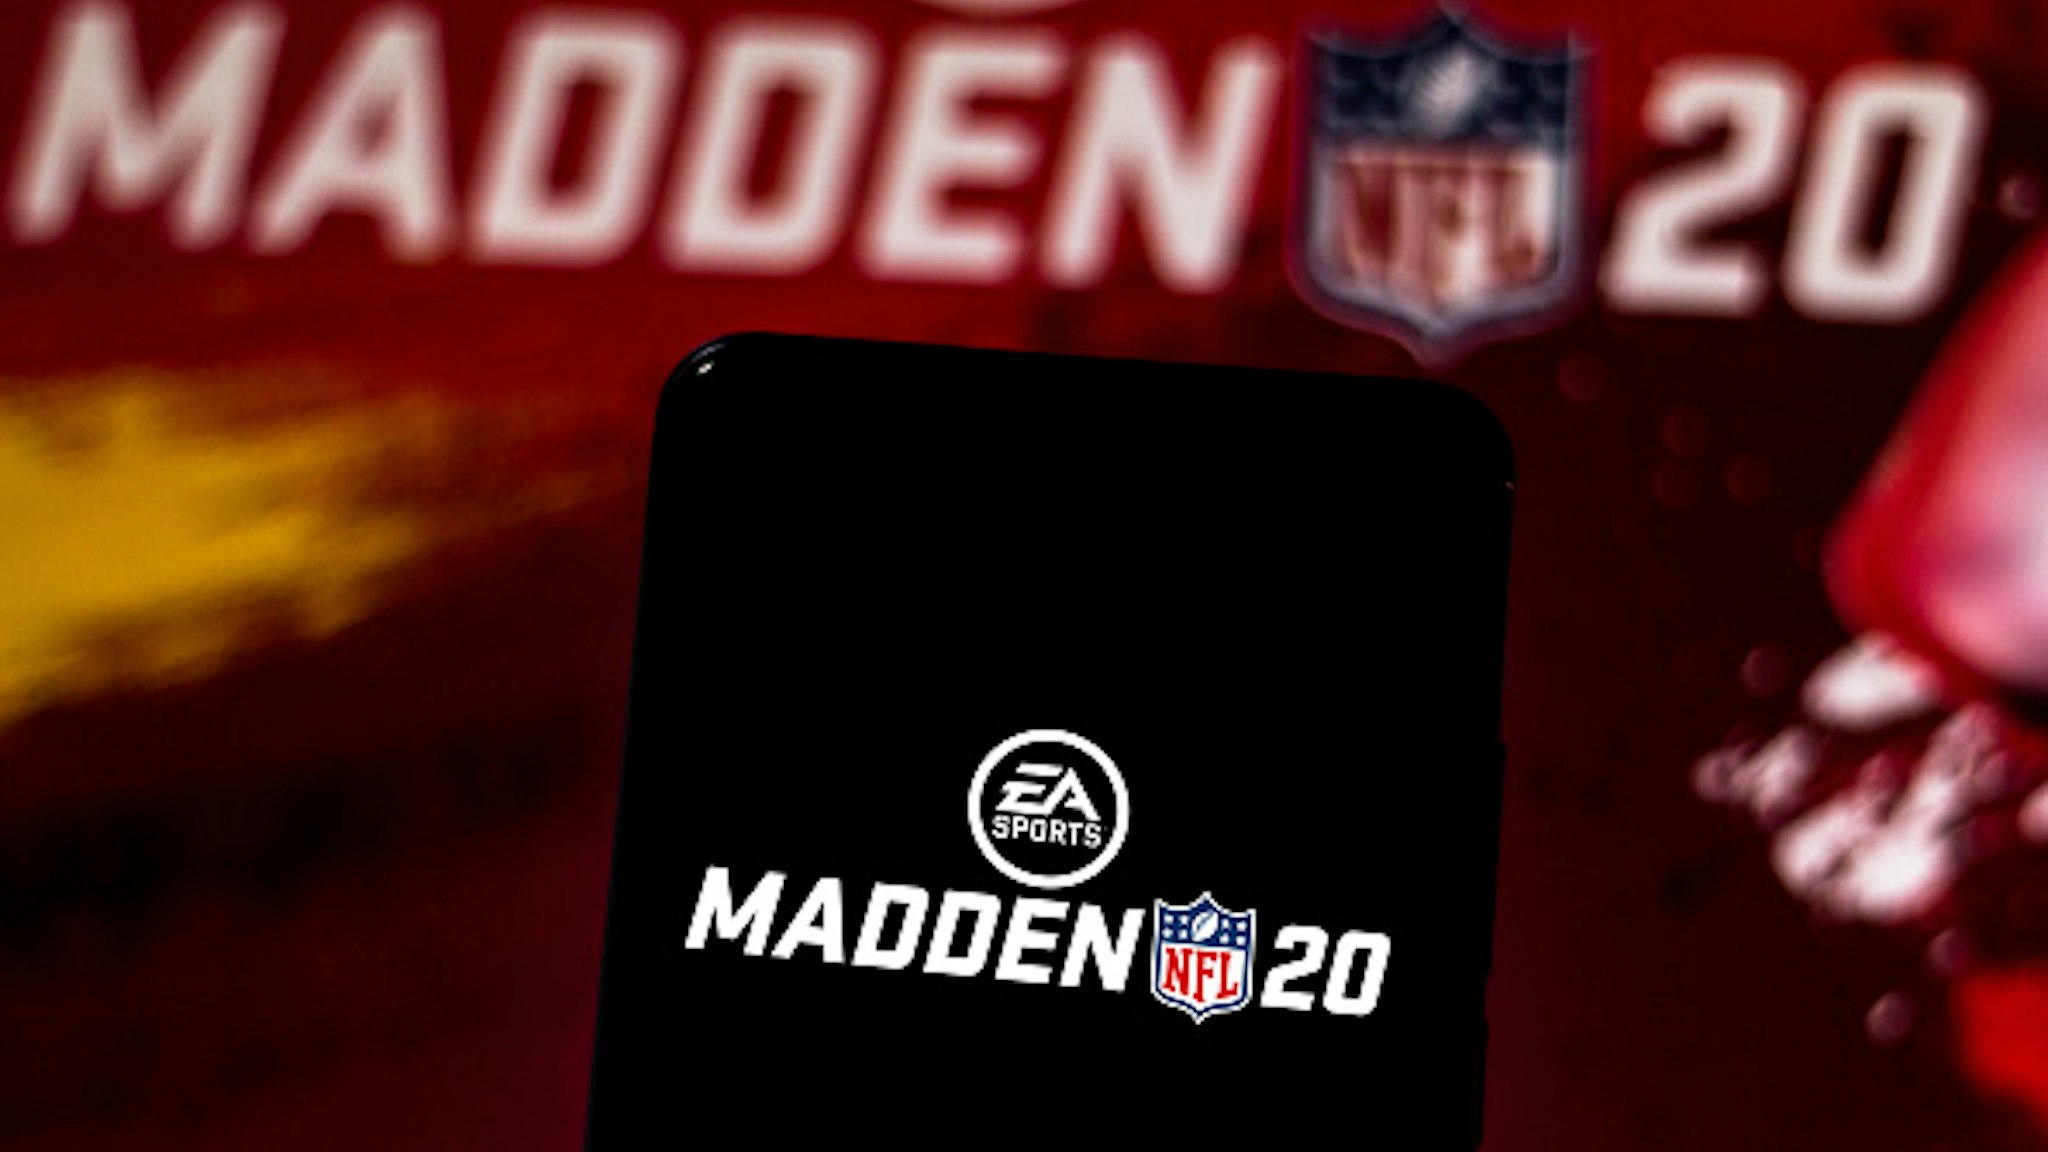 BRAZIL - 2019/06/12: In this photo illustration the Madden NFL 20 logo is displayed on a smartphone.